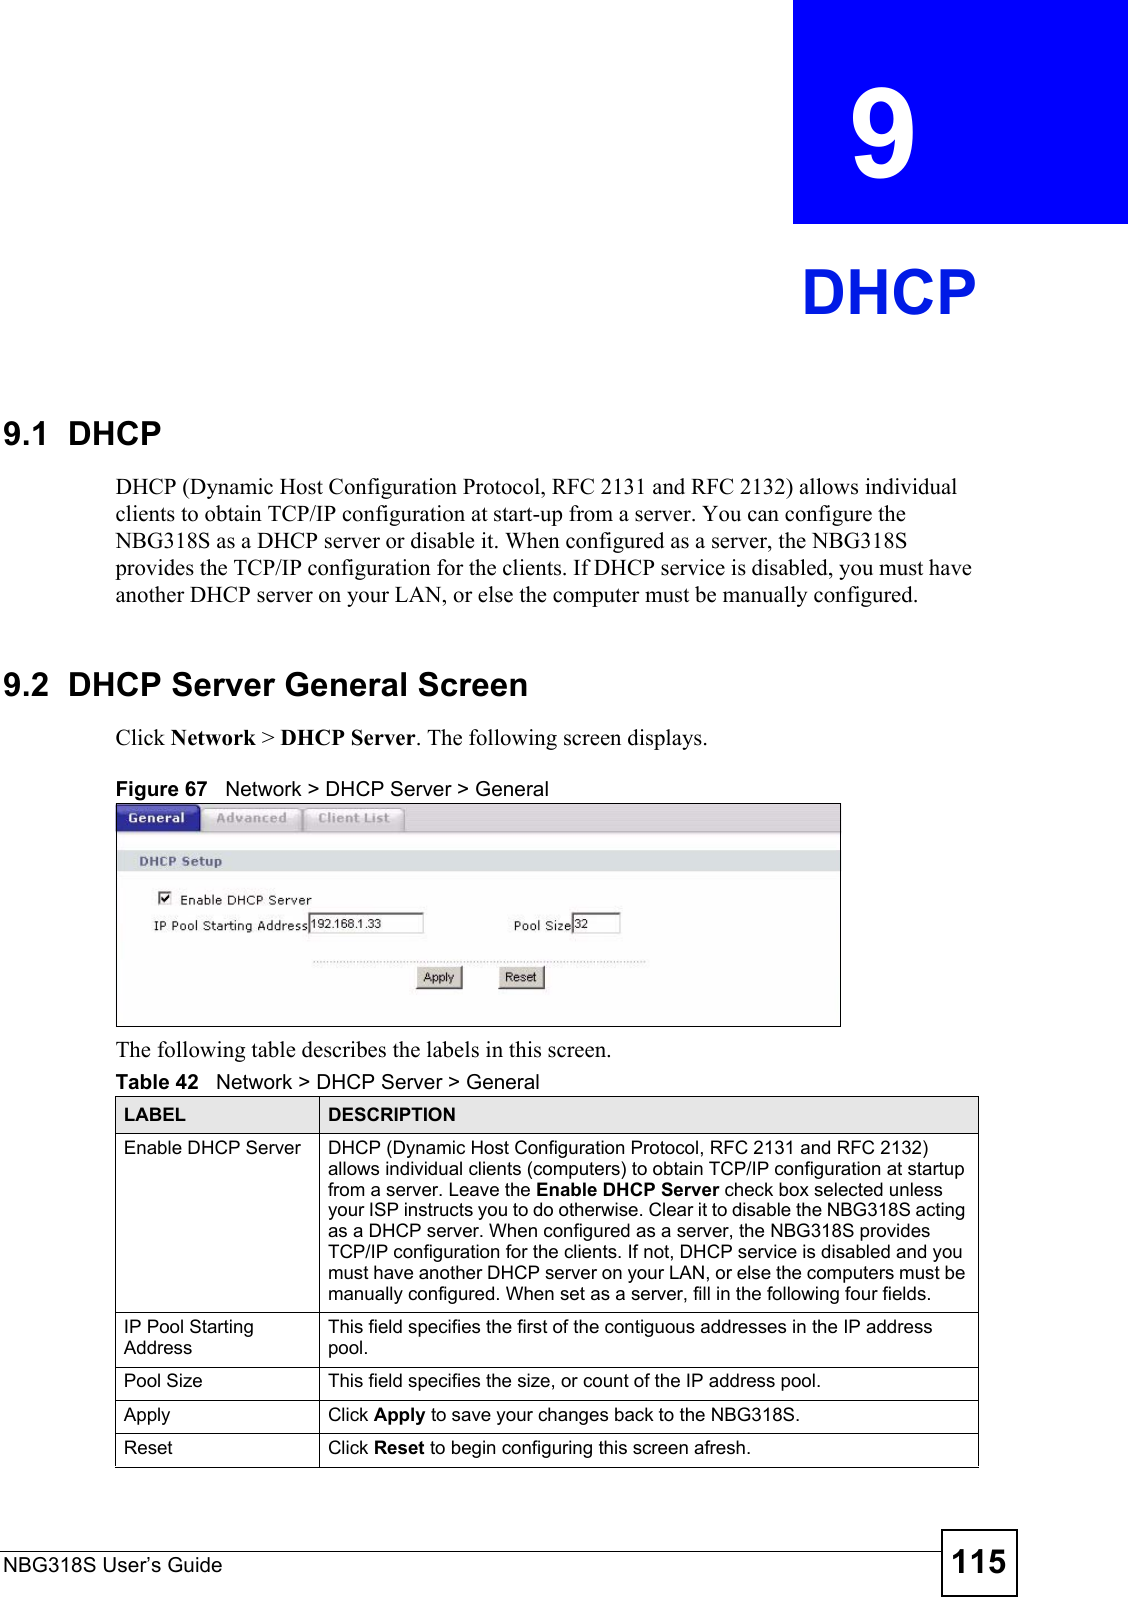 NBG318S User’s Guide 115CHAPTER  9 DHCP9.1  DHCPDHCP (Dynamic Host Configuration Protocol, RFC 2131 and RFC 2132) allows individual clients to obtain TCP/IP configuration at start-up from a server. You can configure the NBG318S as a DHCP server or disable it. When configured as a server, the NBG318S provides the TCP/IP configuration for the clients. If DHCP service is disabled, you must have another DHCP server on your LAN, or else the computer must be manually configured.9.2  DHCP Server General ScreenClick Network &gt; DHCP Server. The following screen displays.Figure 67   Network &gt; DHCP Server &gt; General   The following table describes the labels in this screen.Table 42   Network &gt; DHCP Server &gt; General LABEL DESCRIPTIONEnable DHCP Server DHCP (Dynamic Host Configuration Protocol, RFC 2131 and RFC 2132) allows individual clients (computers) to obtain TCP/IP configuration at startup from a server. Leave the Enable DHCP Server check box selected unless your ISP instructs you to do otherwise. Clear it to disable the NBG318S acting as a DHCP server. When configured as a server, the NBG318S provides TCP/IP configuration for the clients. If not, DHCP service is disabled and you must have another DHCP server on your LAN, or else the computers must be manually configured. When set as a server, fill in the following four fields.IP Pool Starting AddressThis field specifies the first of the contiguous addresses in the IP address pool.Pool Size This field specifies the size, or count of the IP address pool.Apply Click Apply to save your changes back to the NBG318S.Reset Click Reset to begin configuring this screen afresh.